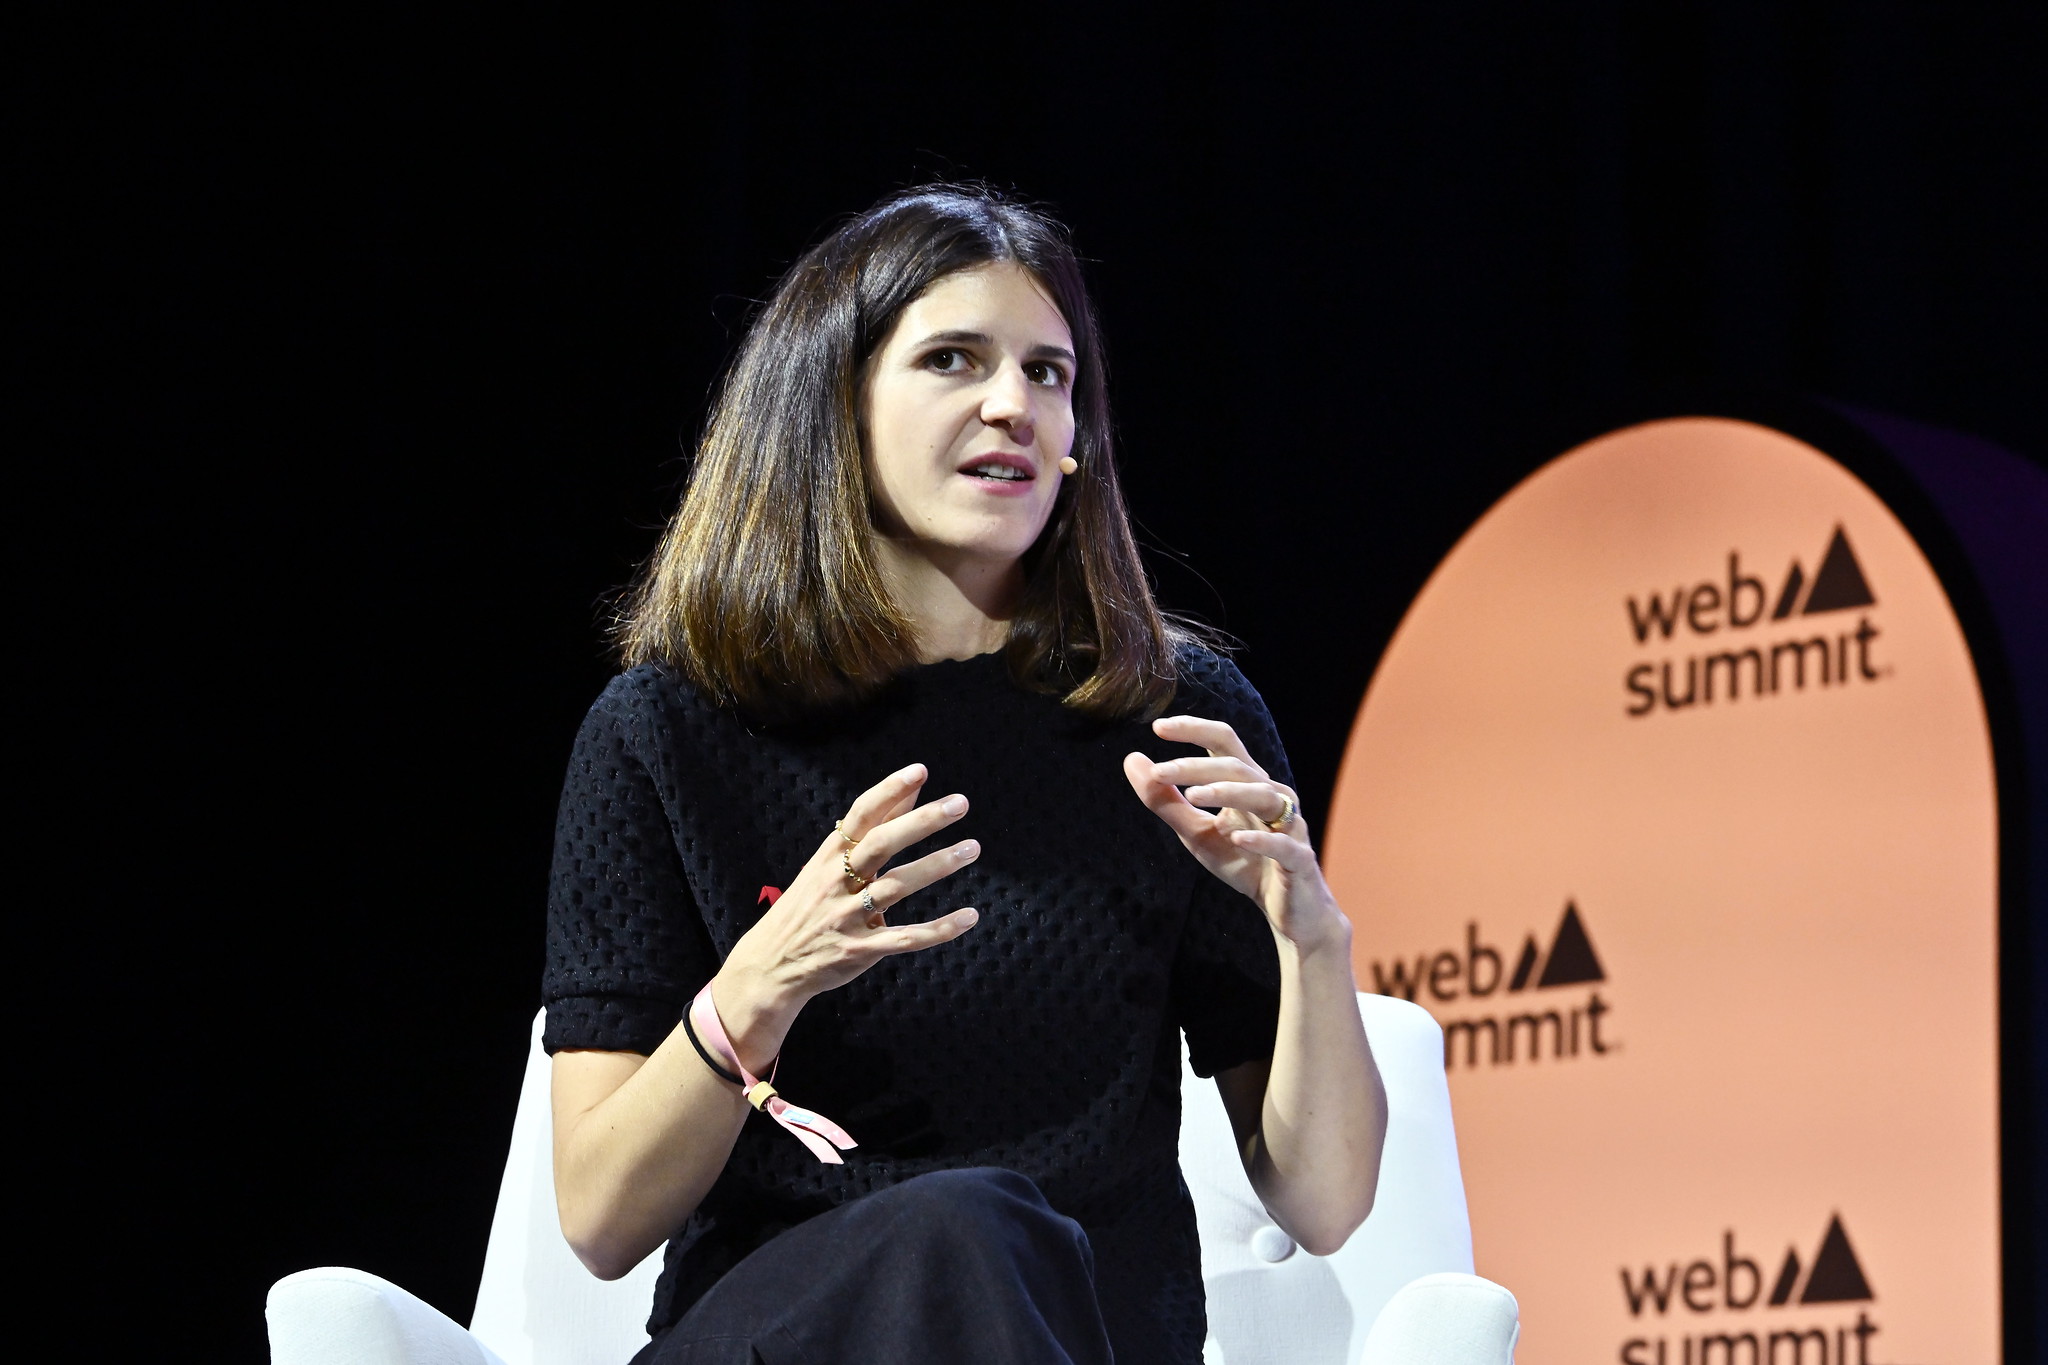 A photograph of Clara Chappaz, director of La French Tech, speaking on the Startup University stage at Web Summit. Clara is sitting on a chair and appears to be speaking, looking away from the camera and towards the crowd. The background is dark and features the Web Summit logo.